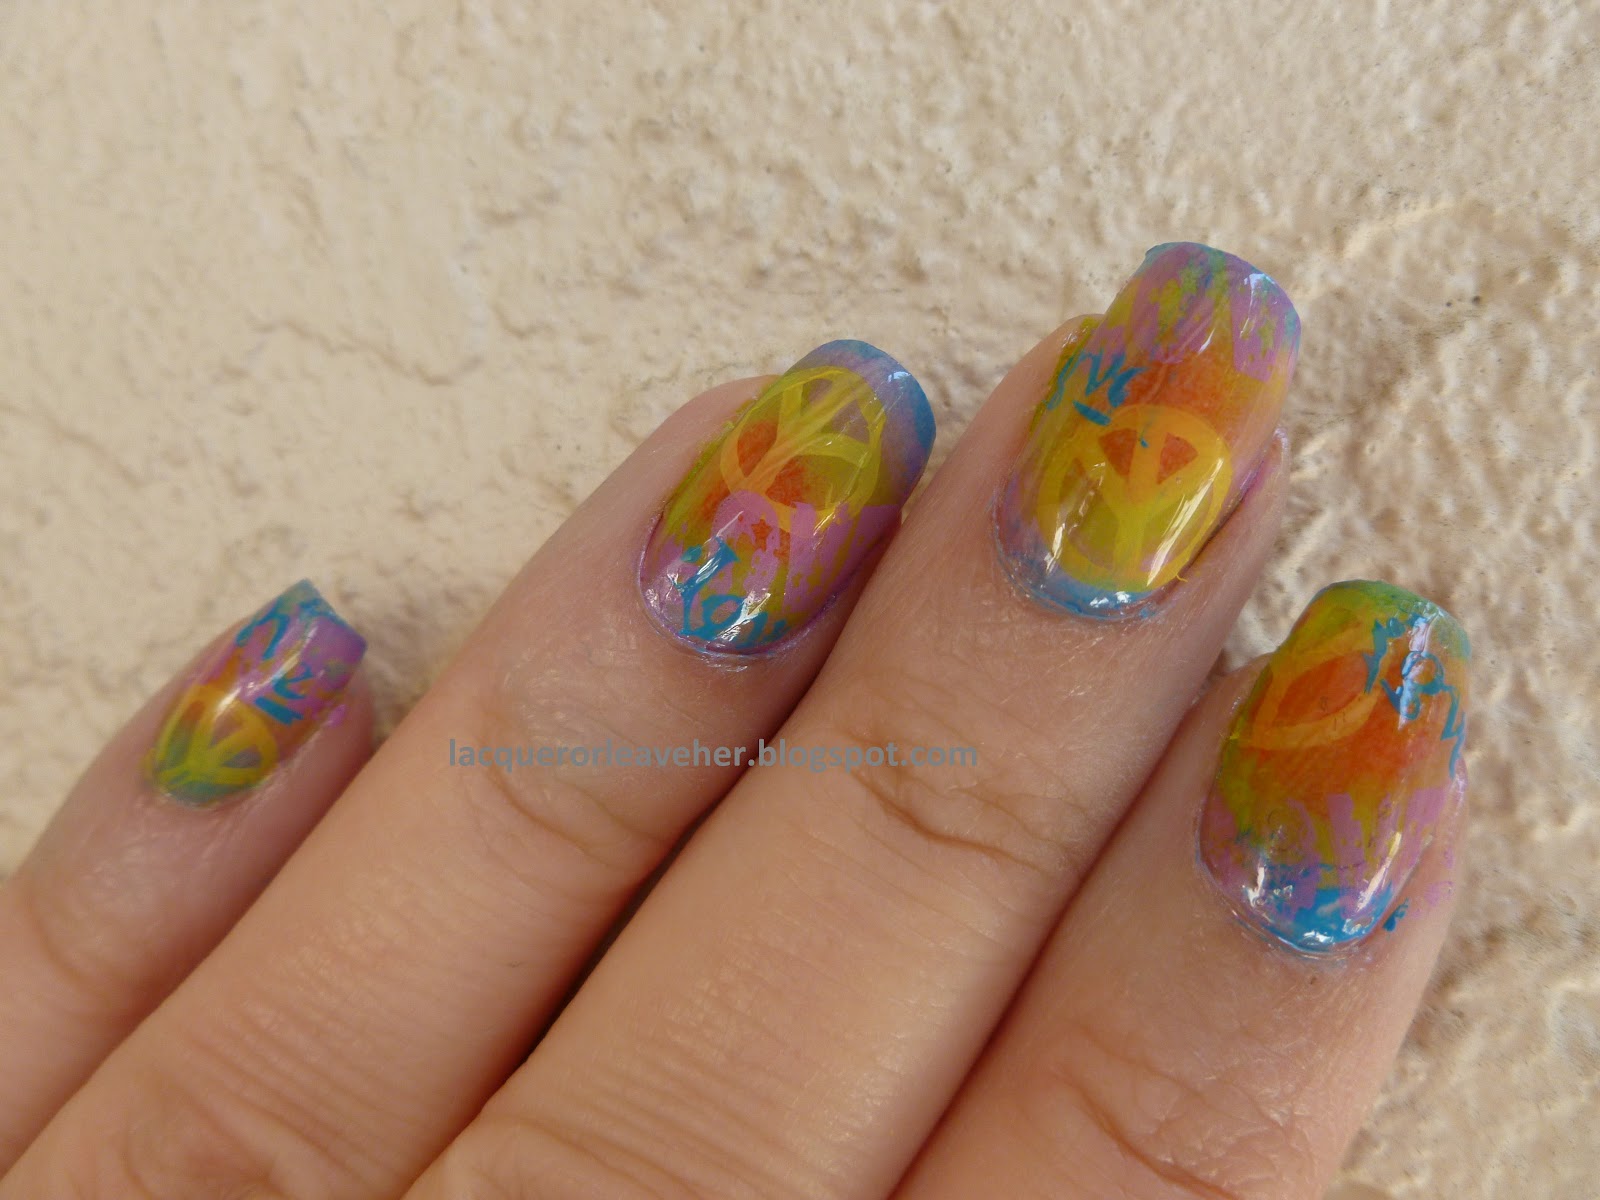 2. Flower Power Nails - wide 1